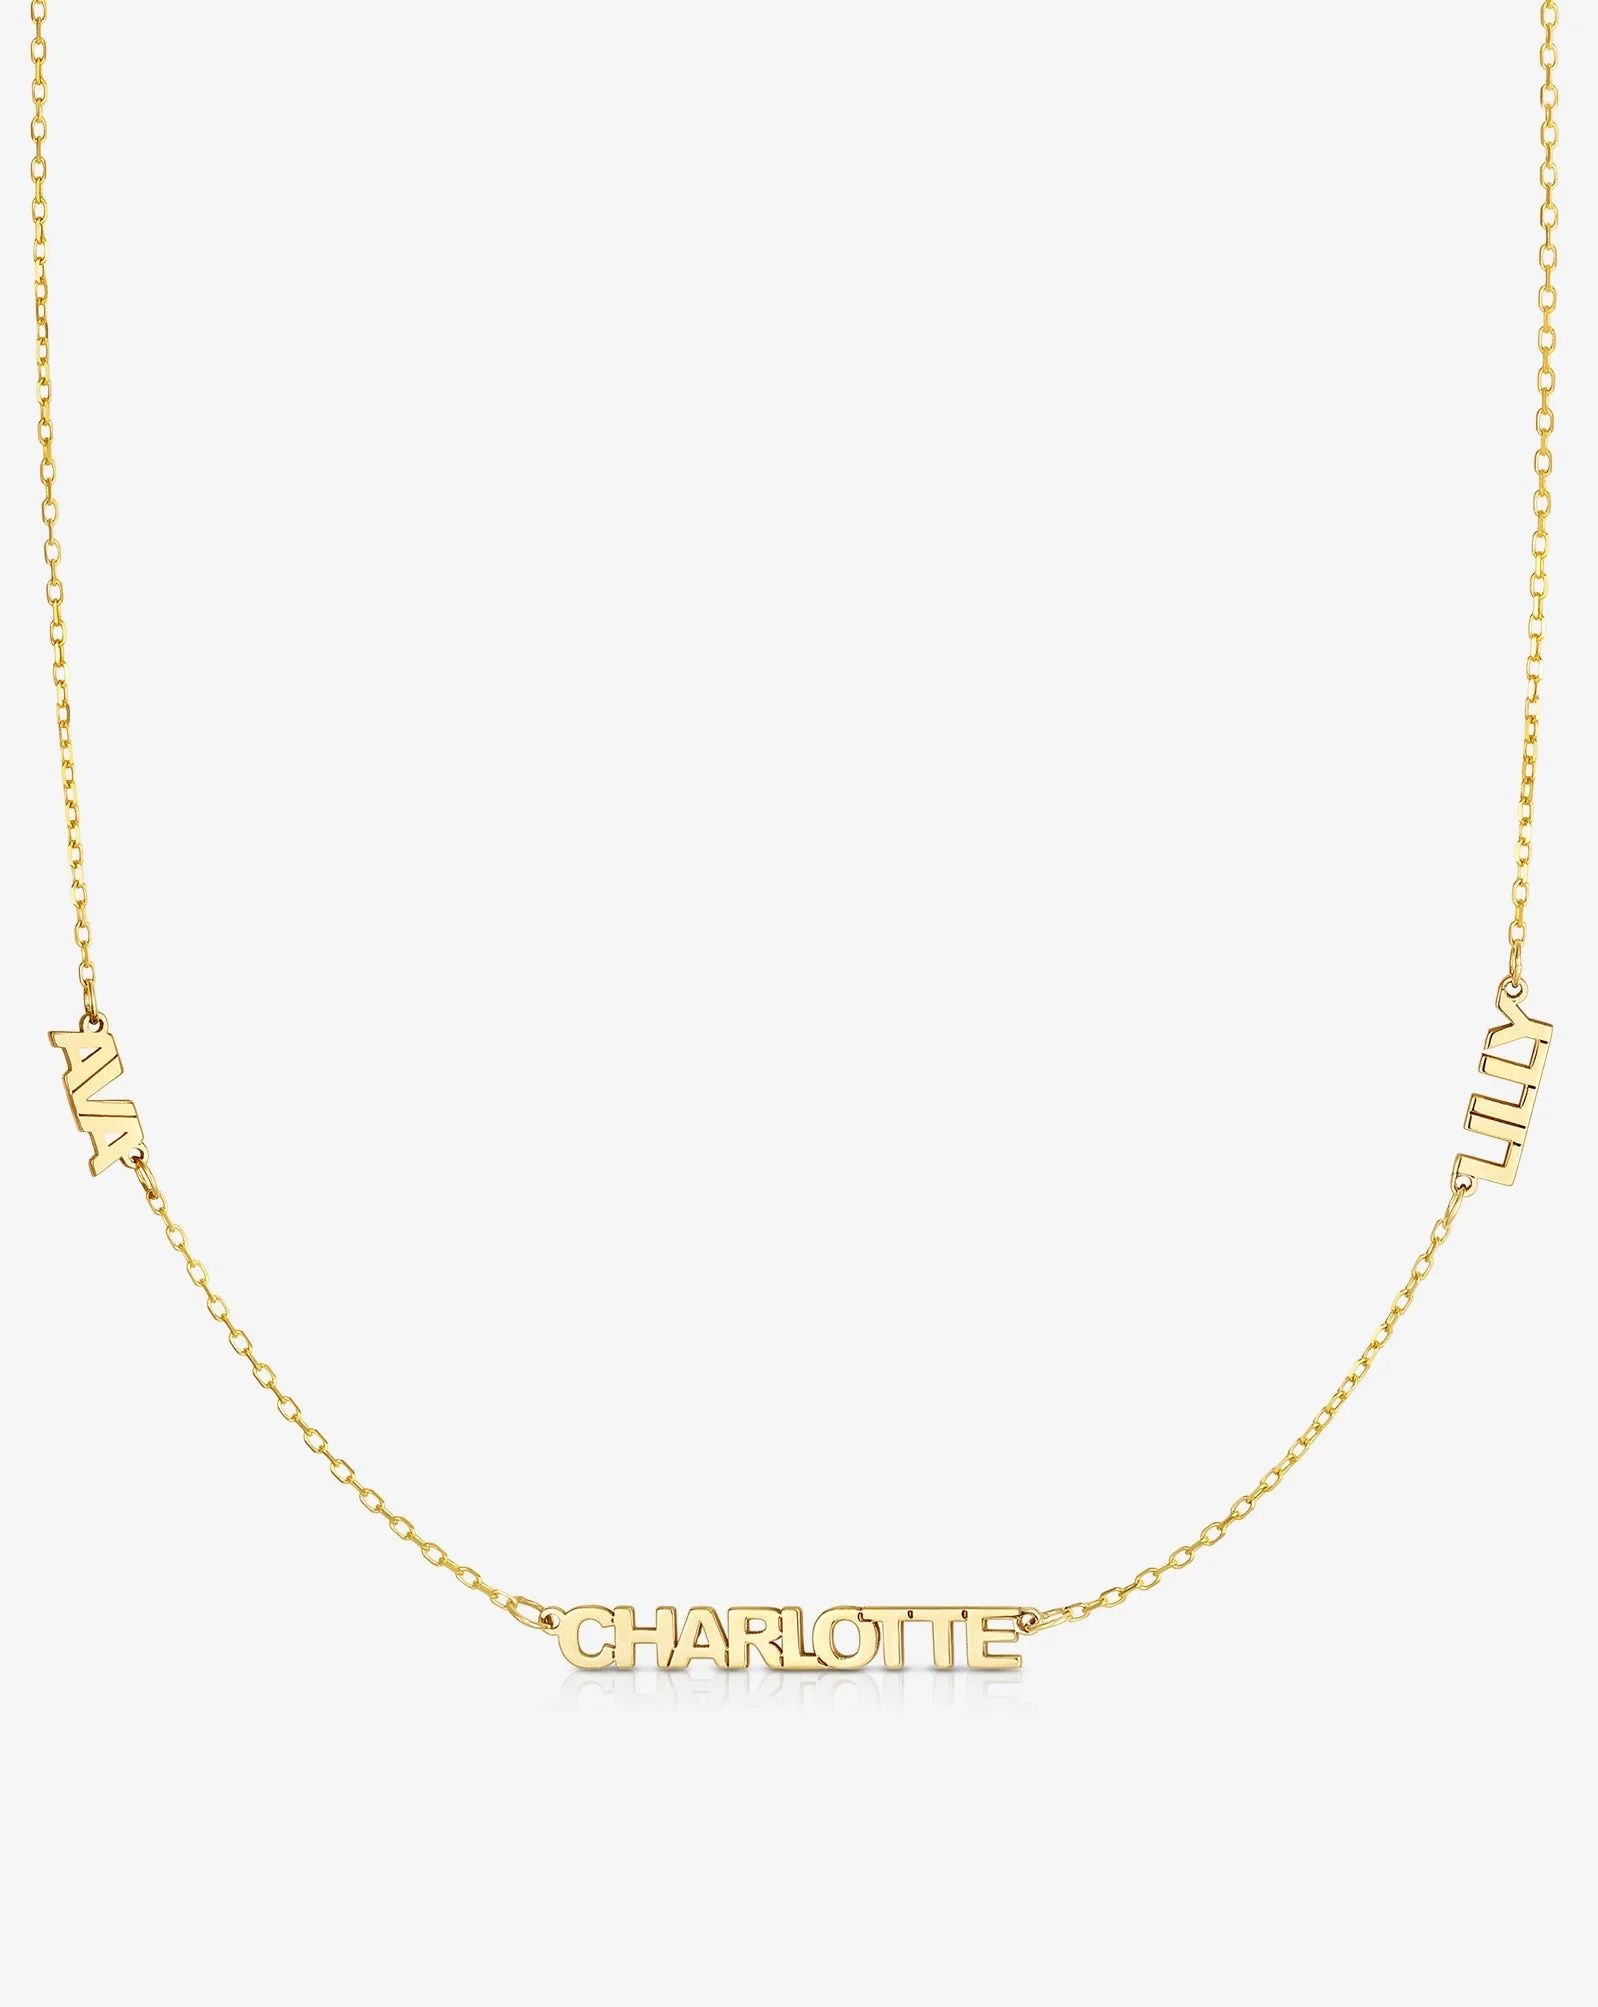 Personalized Multi-Name Necklace | Ring Concierge